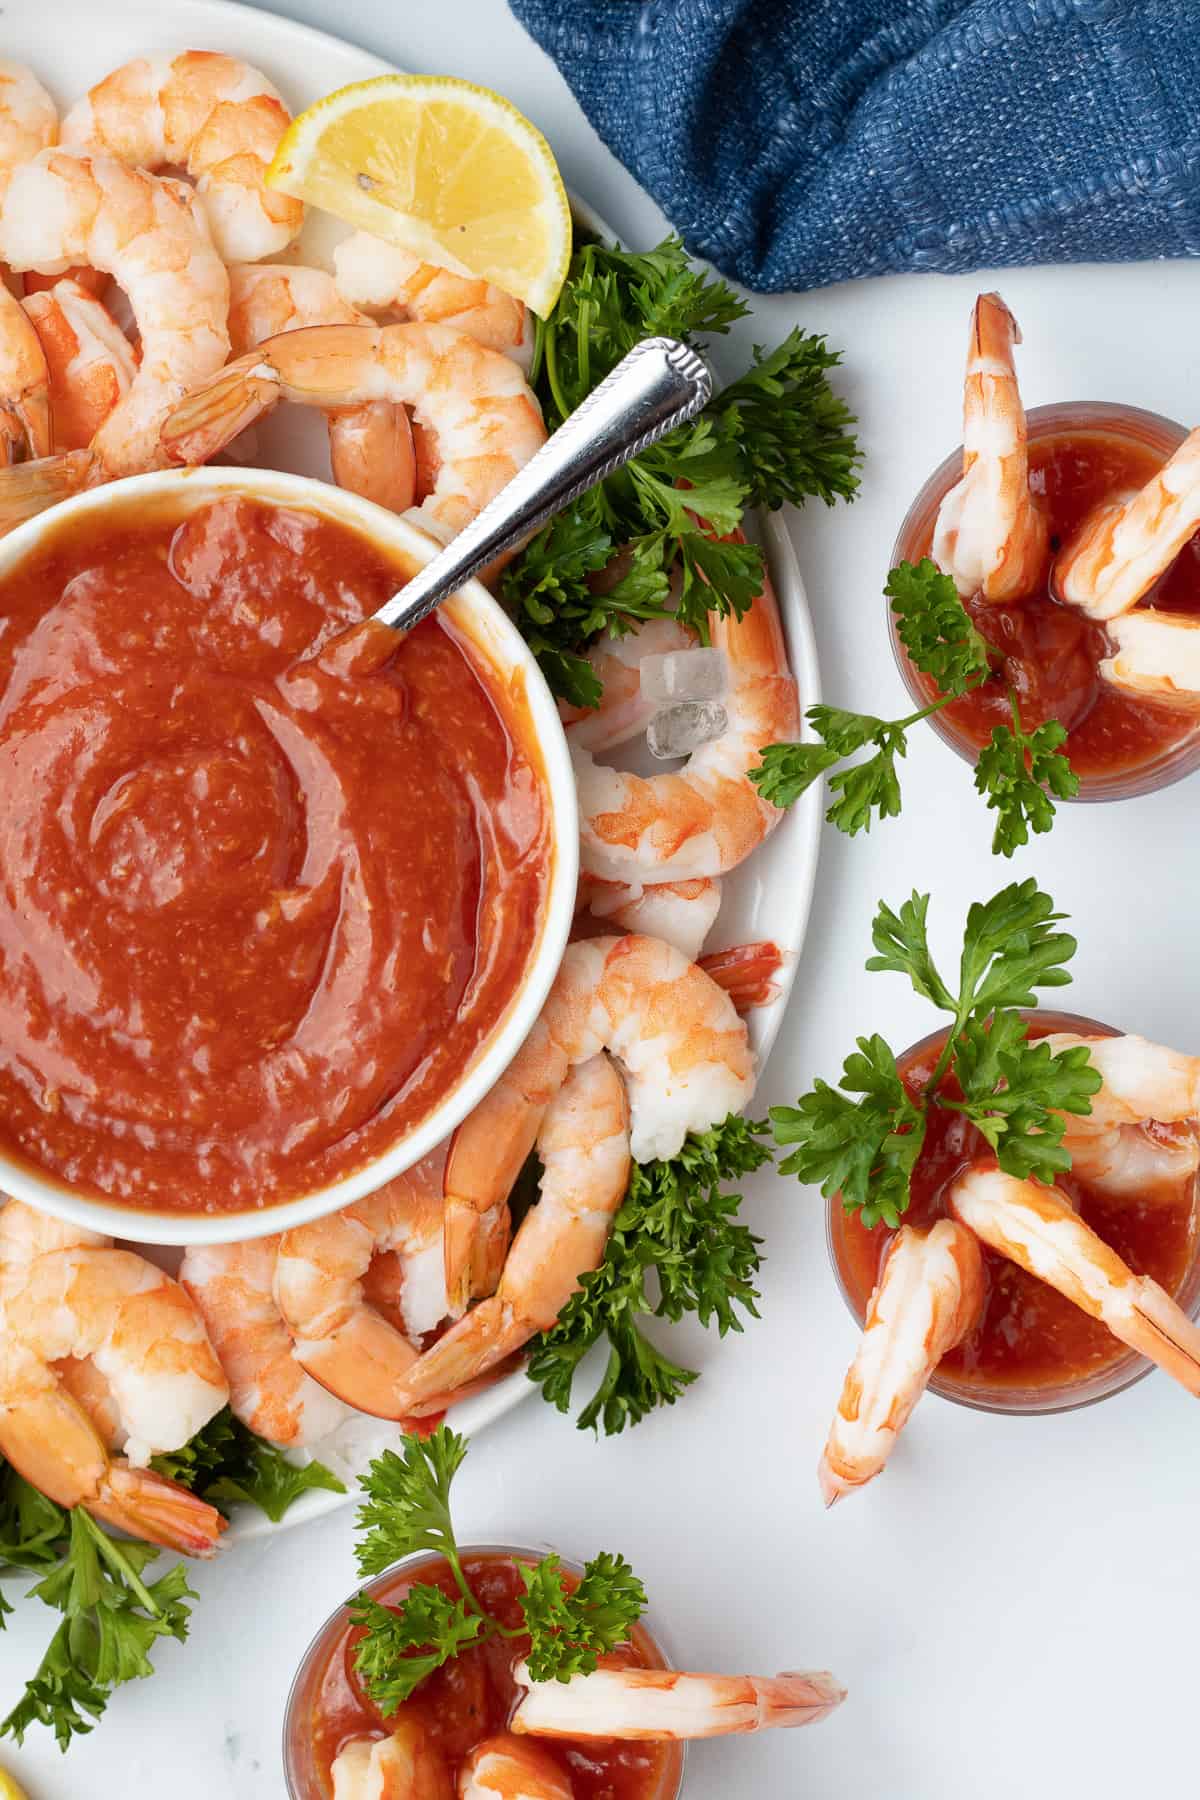 Small cups with cocktail sauce and shrimp next to a platter with more shrimp and a bowl of cocktail sauce.